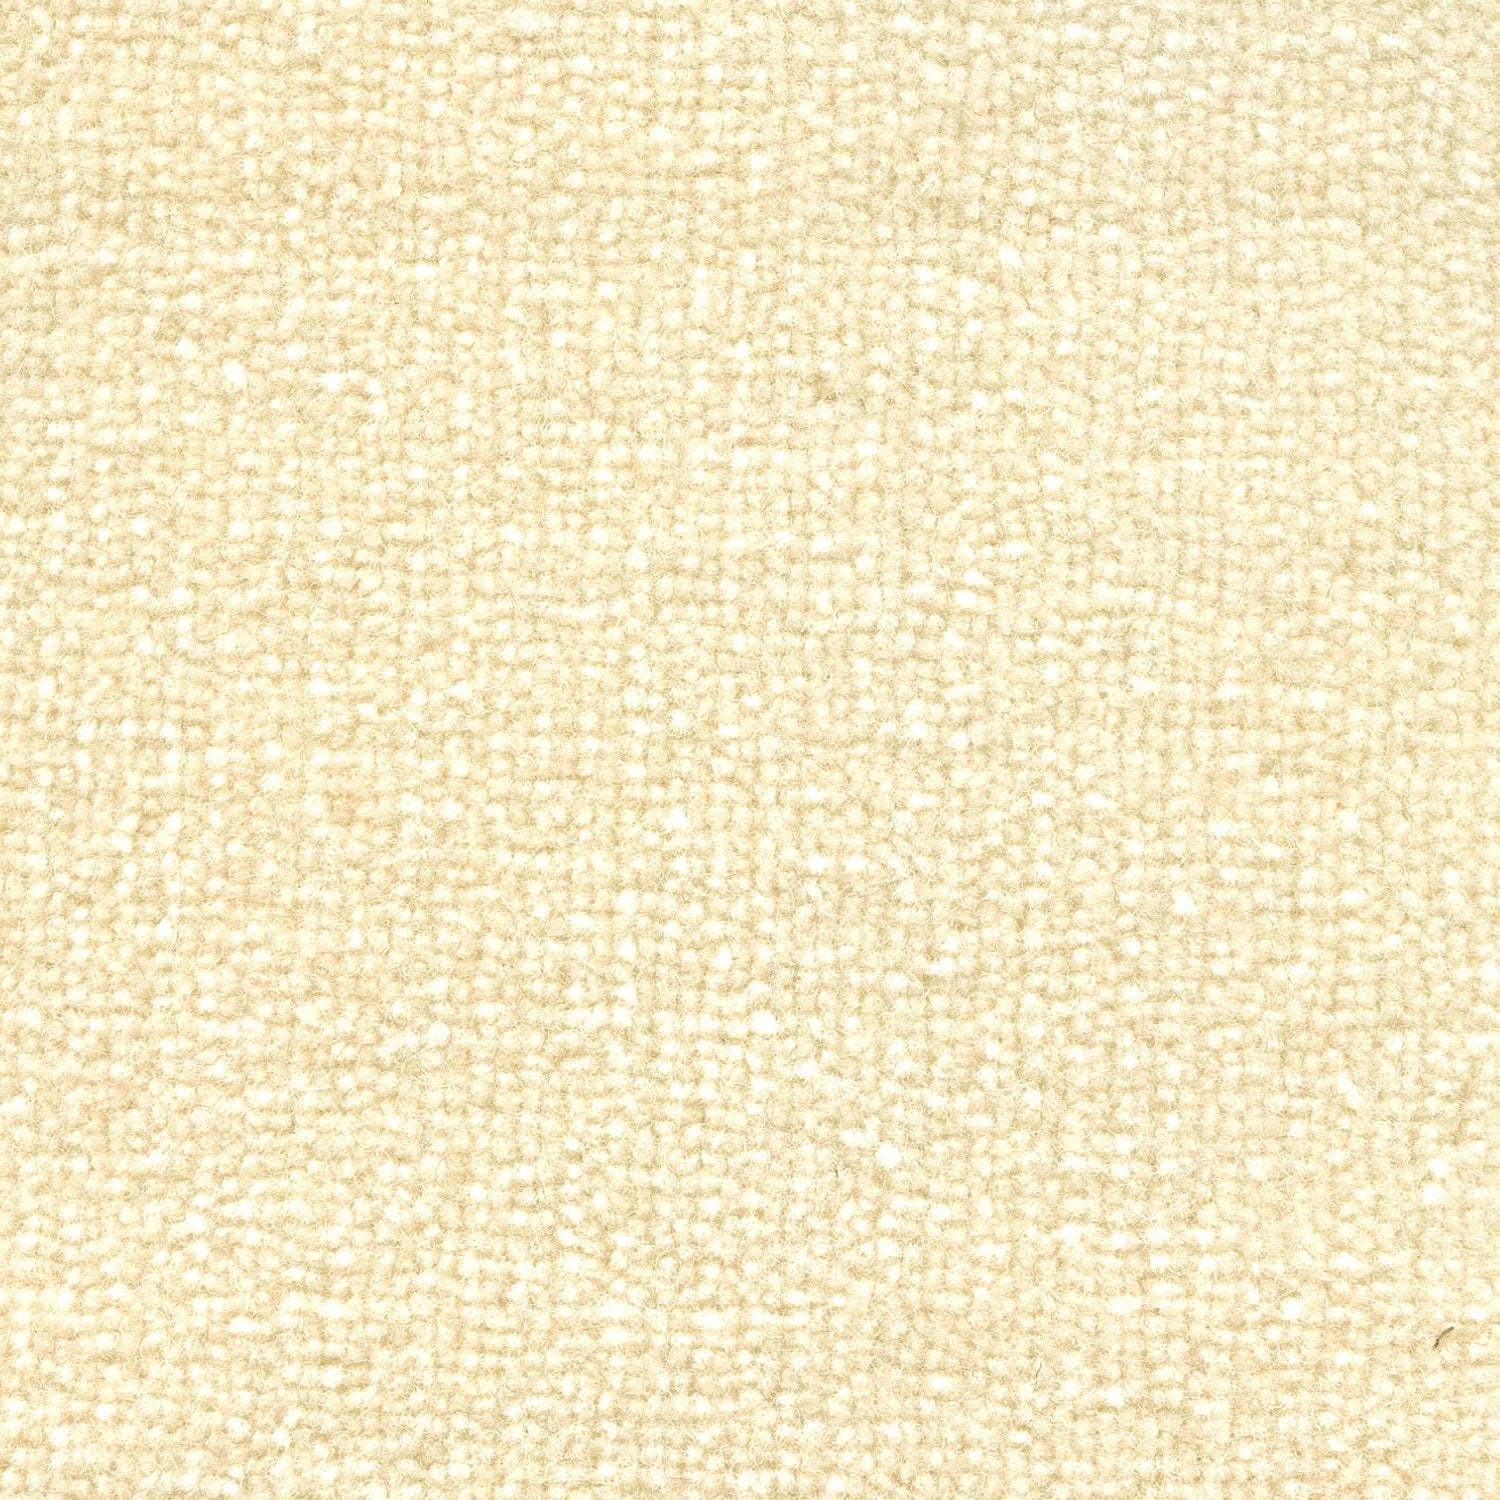 Wool broadloom carpet swatch in a high-pile weave in a solid cream colorway.